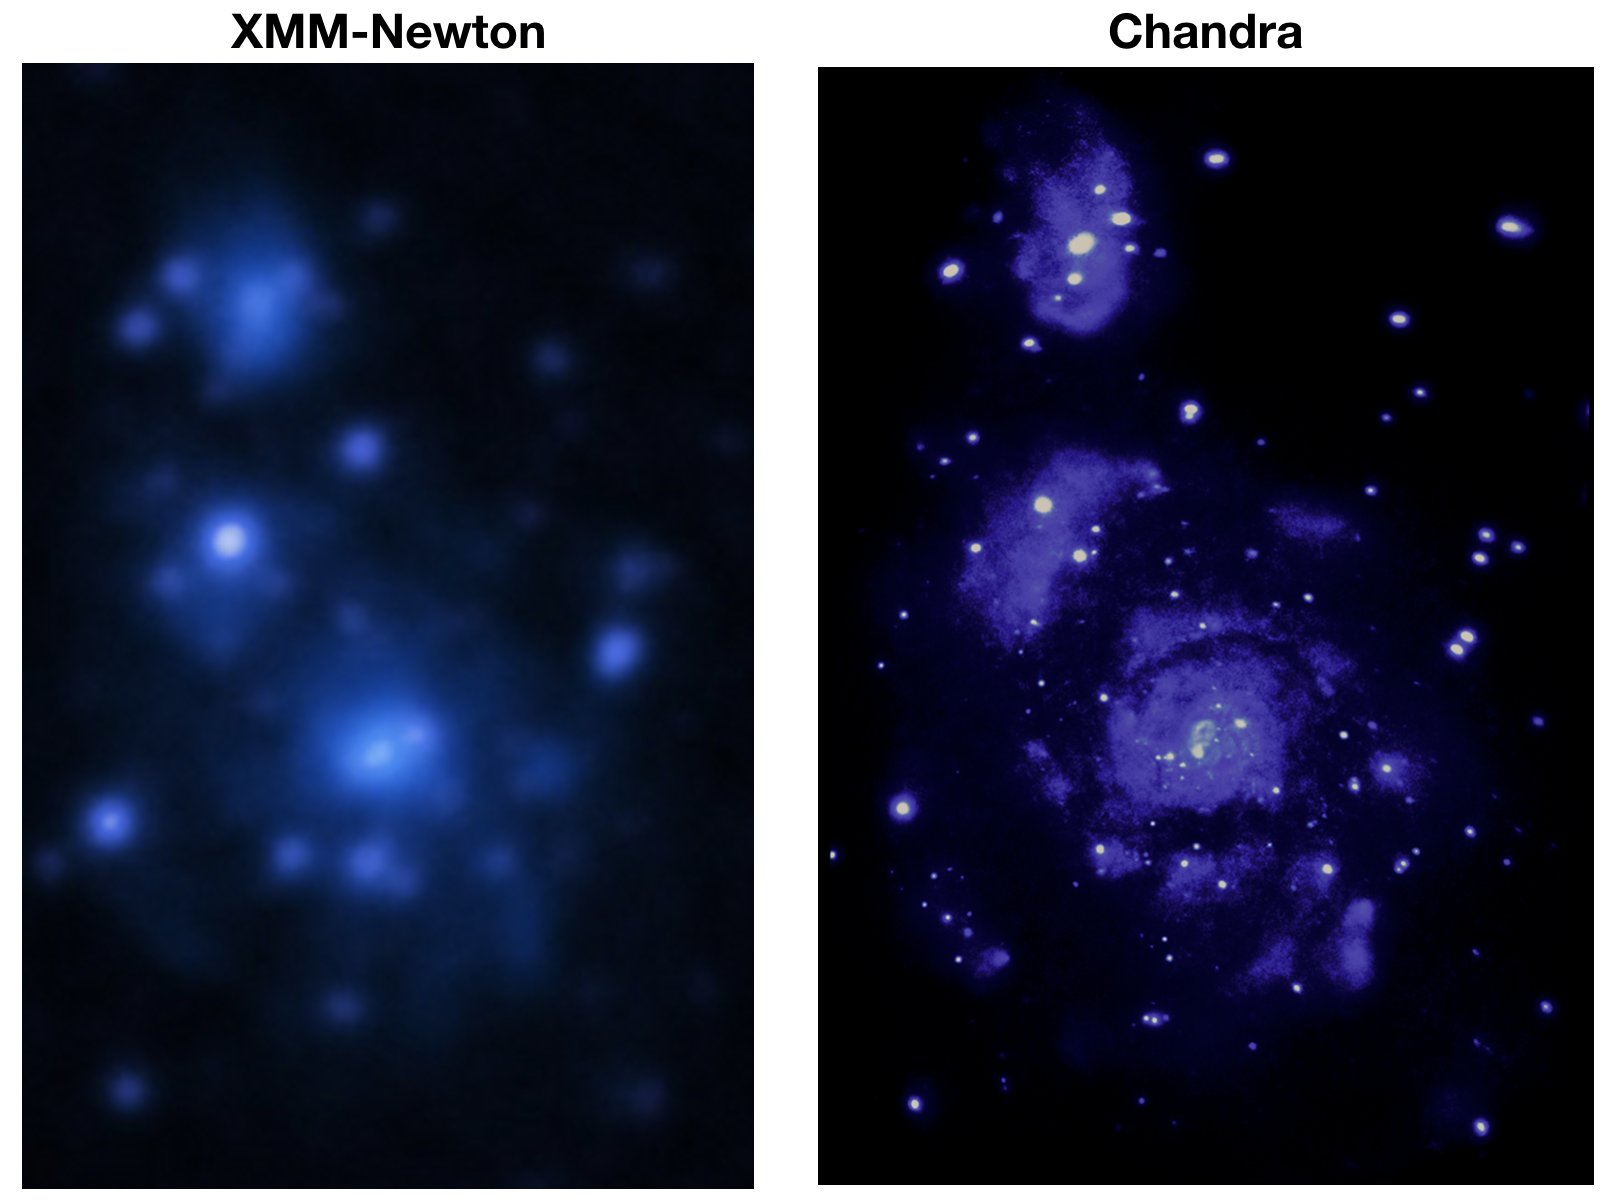 Comparative astrophysical observations of a galaxy cluster in x-ray wavelengths by the xmm-newton space telescope and chandra telescopes.